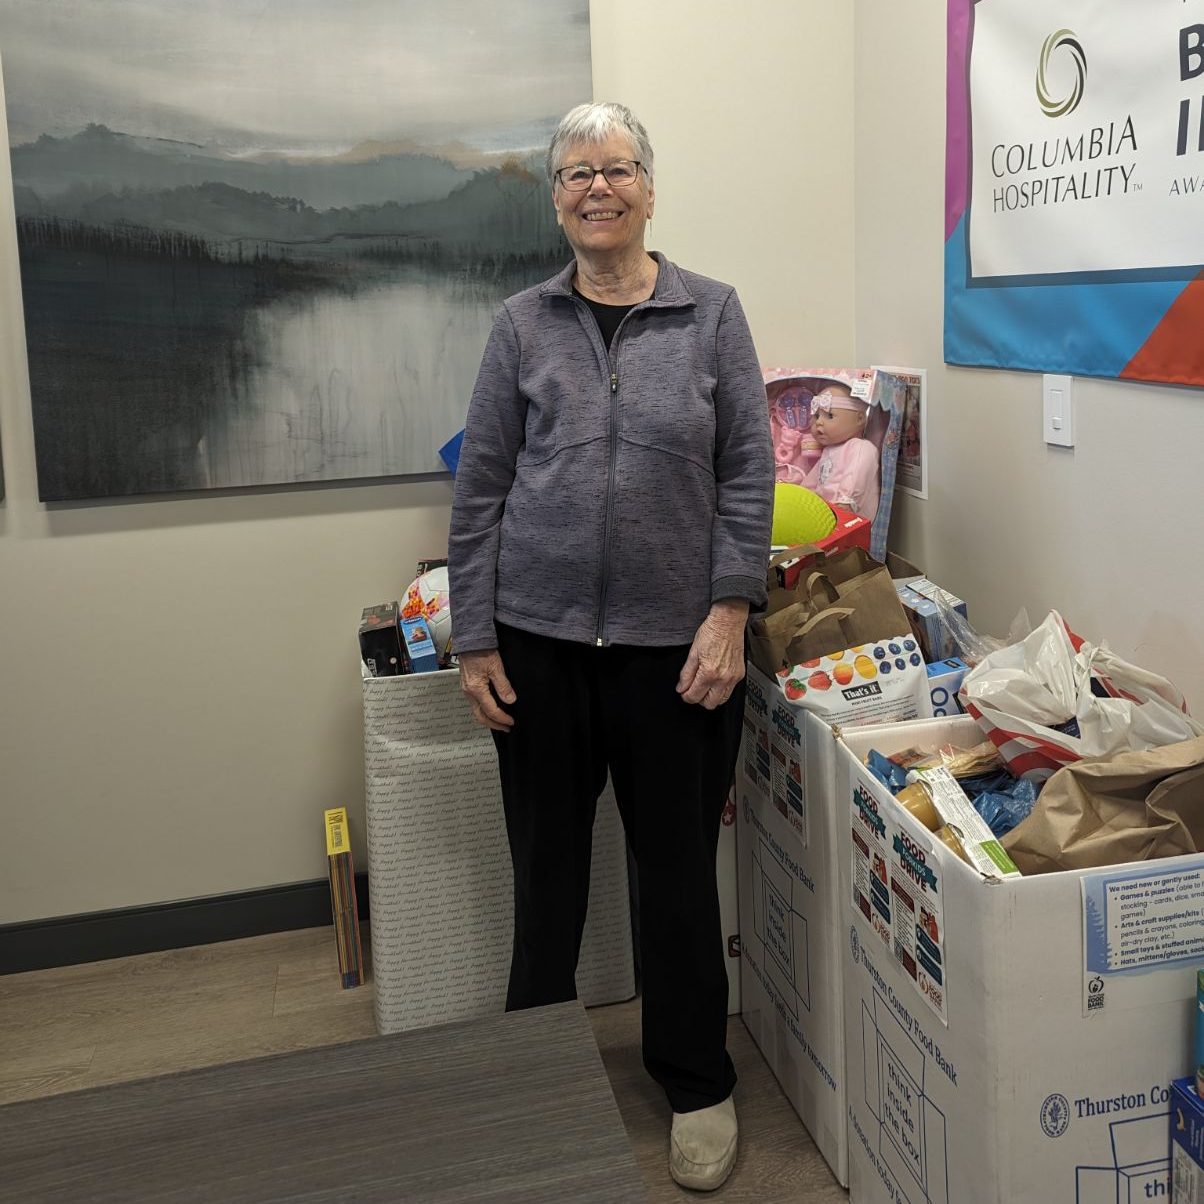 Kathie Deviny standing by larges boxes full of donated item. A landscape painting of a lake and mountains is on the wall behind her